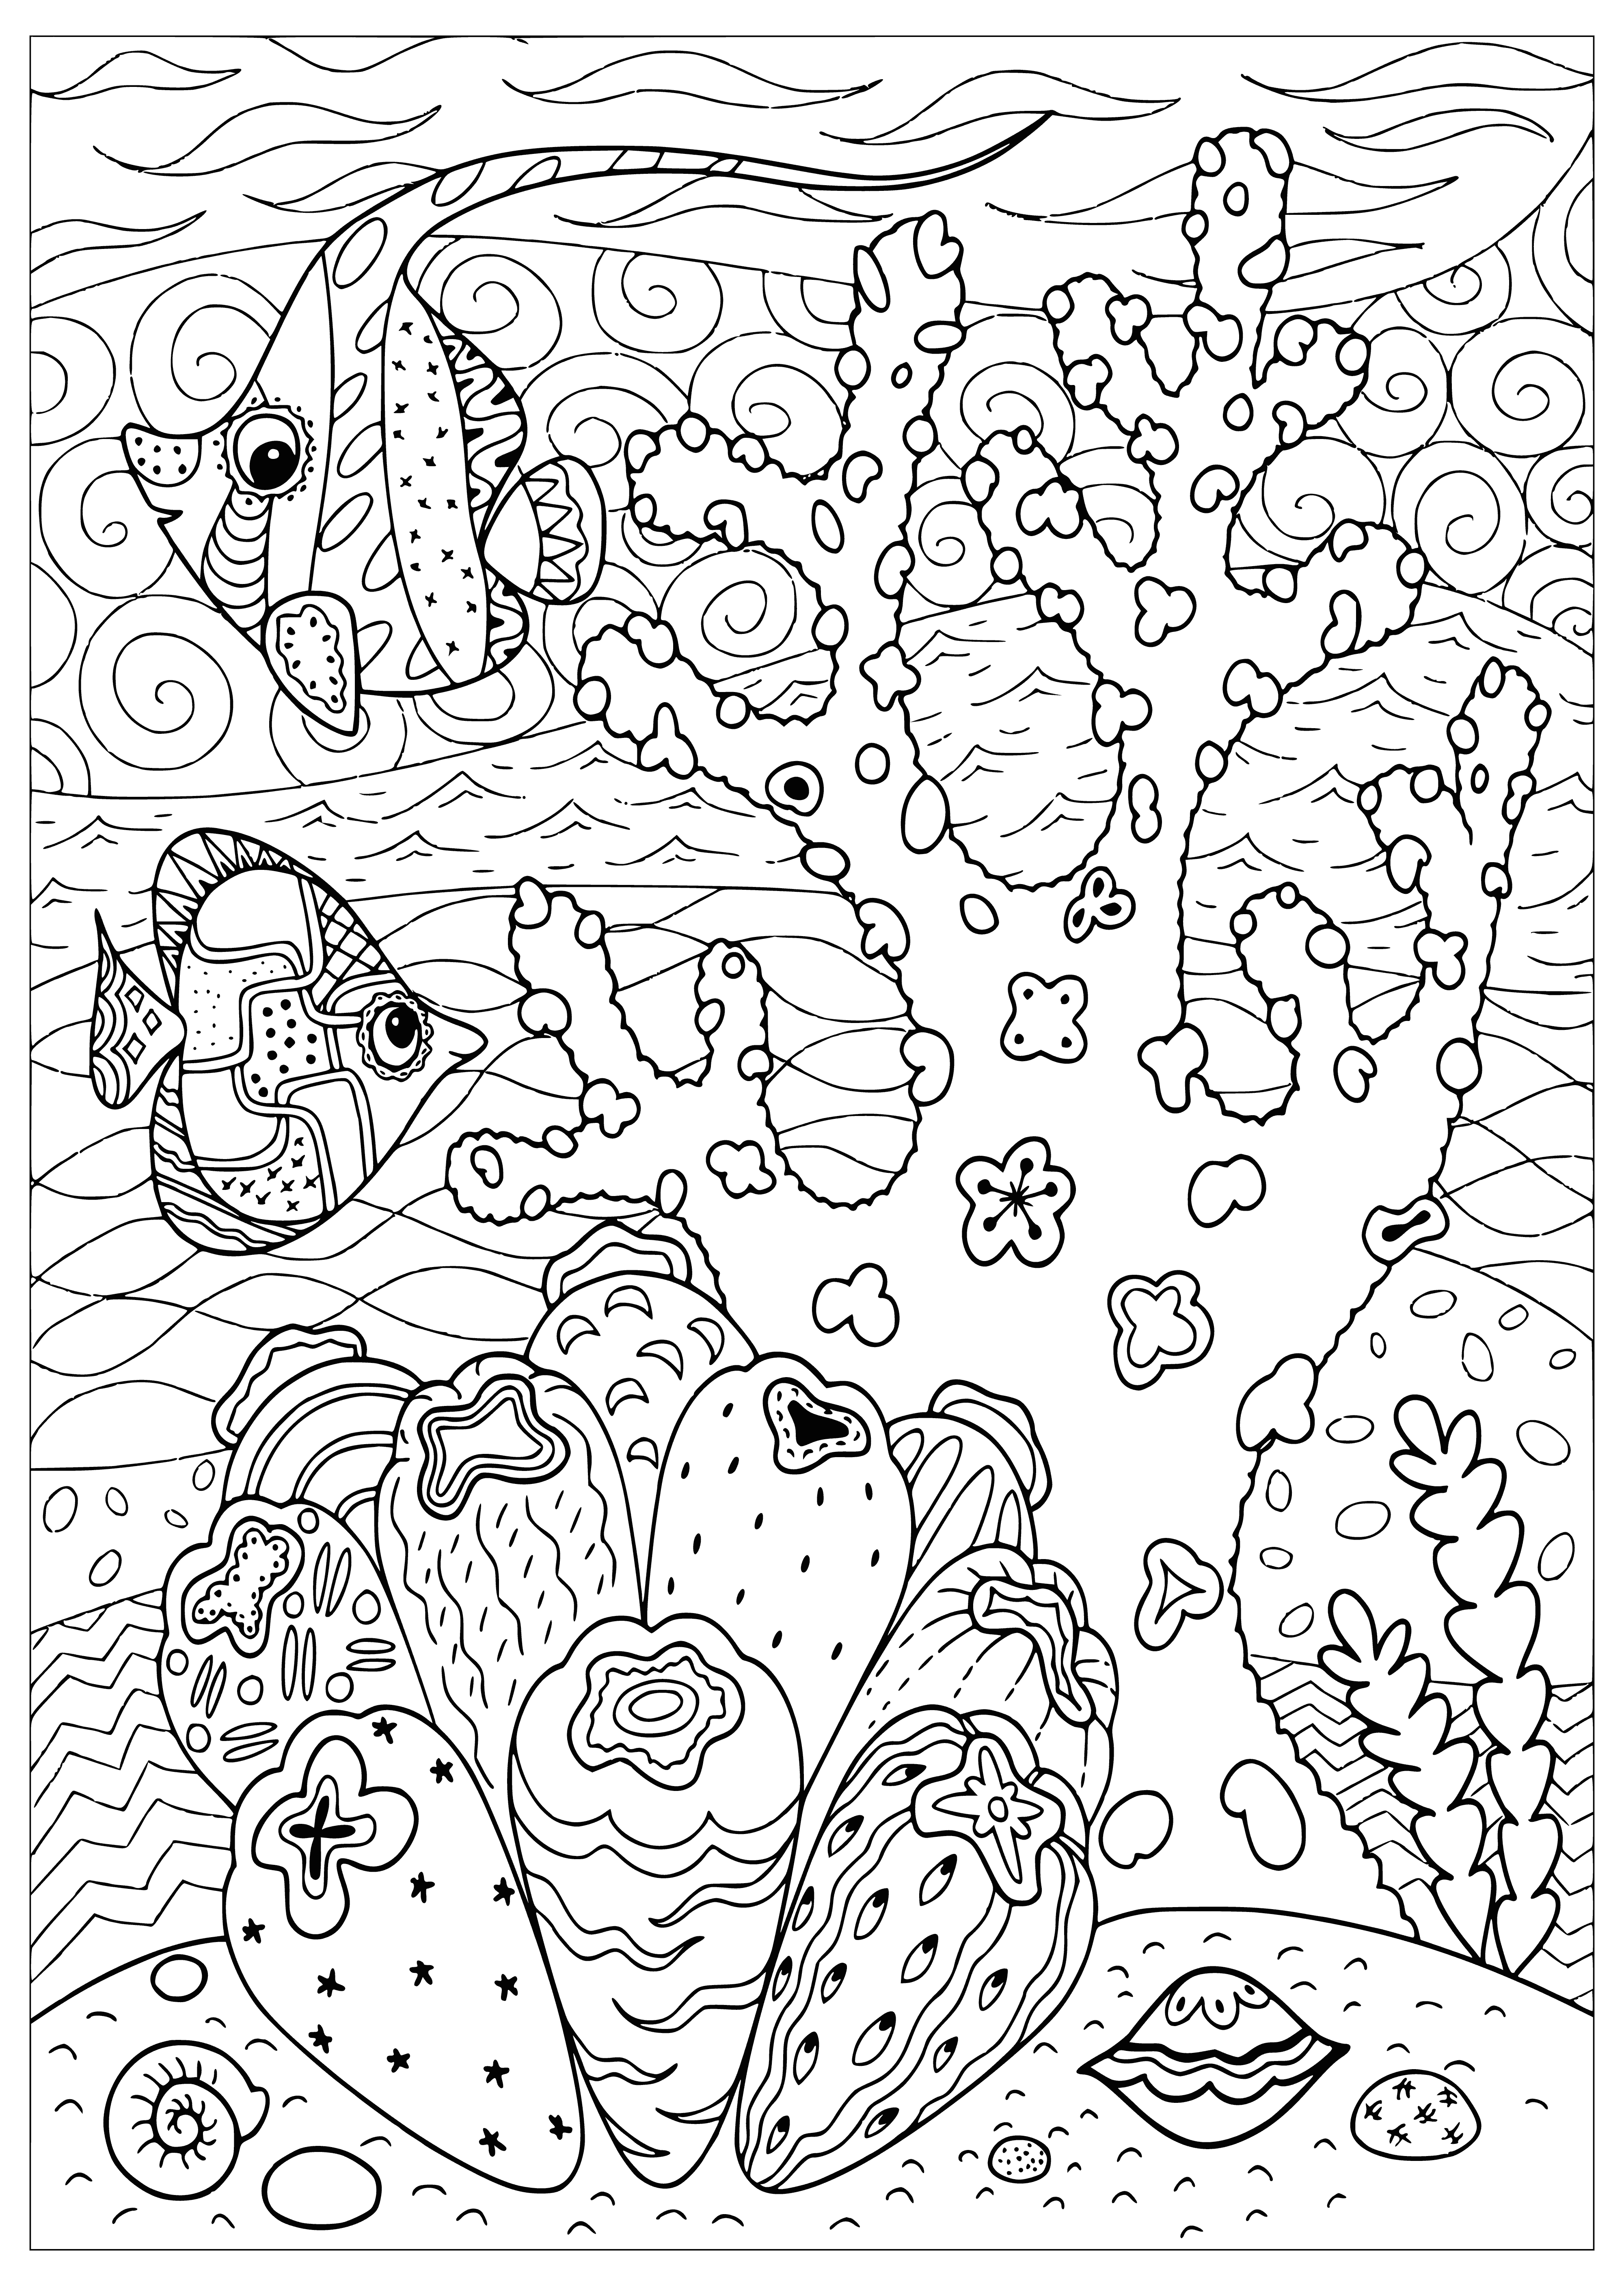 coloring page: Brightly colored fish, coral, & other sea life found in a vibrant coral reef. Some are swimming & others are hiding in the coral.